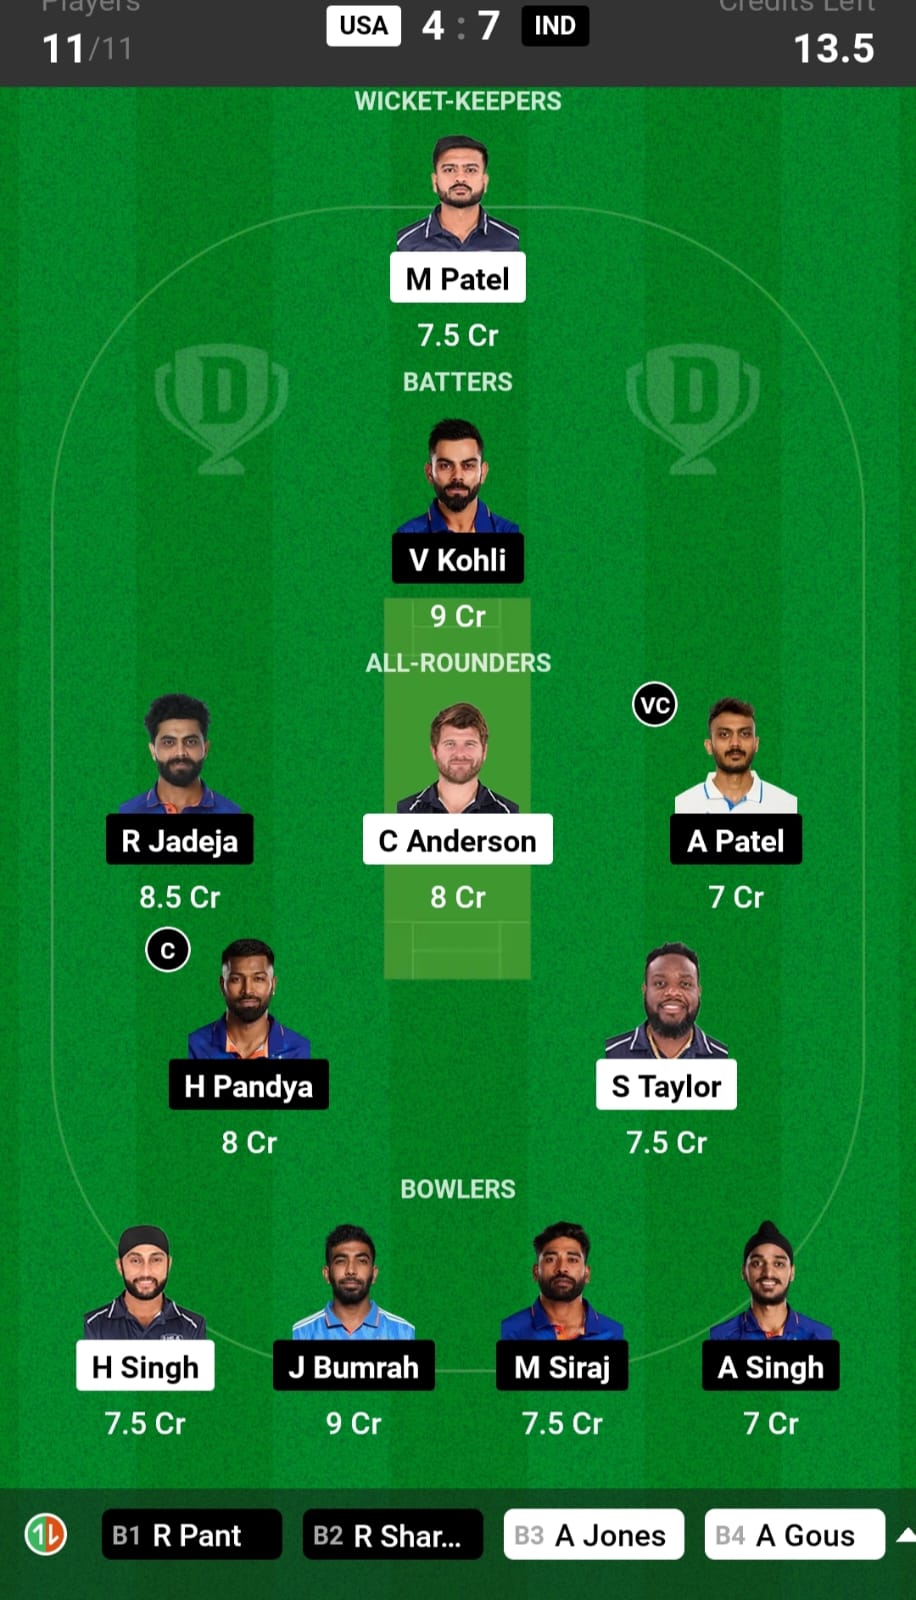 Get USA vs IND Dream11 Prediction and Fantasy Tips for the 25th ICC T20 World Cup 2024 match. Find out the pitch report and player stats.